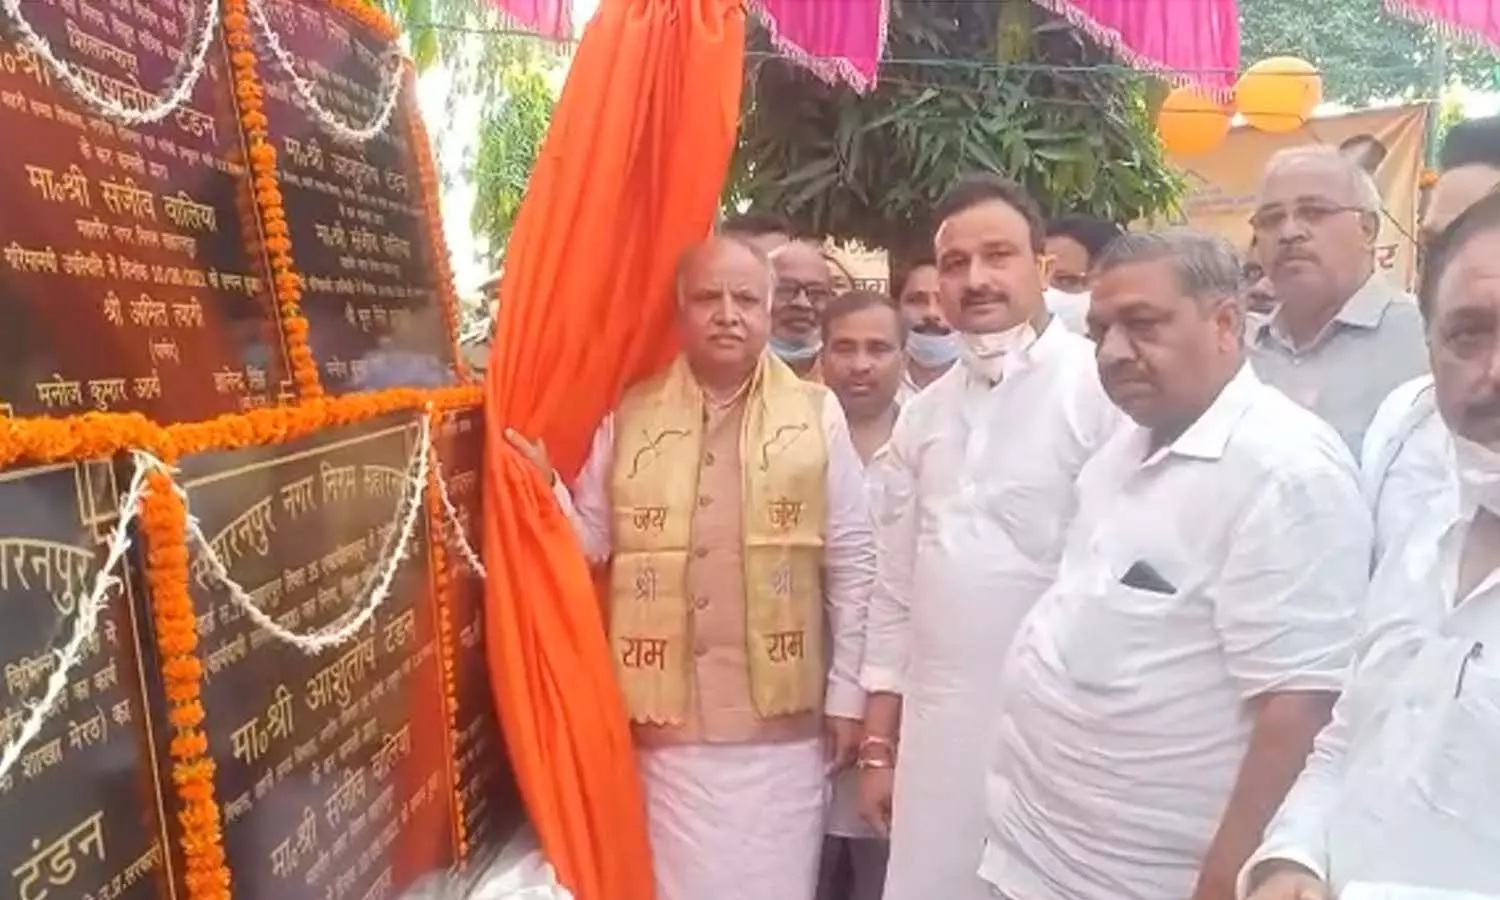 Saharanpur got the gift of many projects, Urban Development Minister Ashutosh Tandon laid the foundation stone